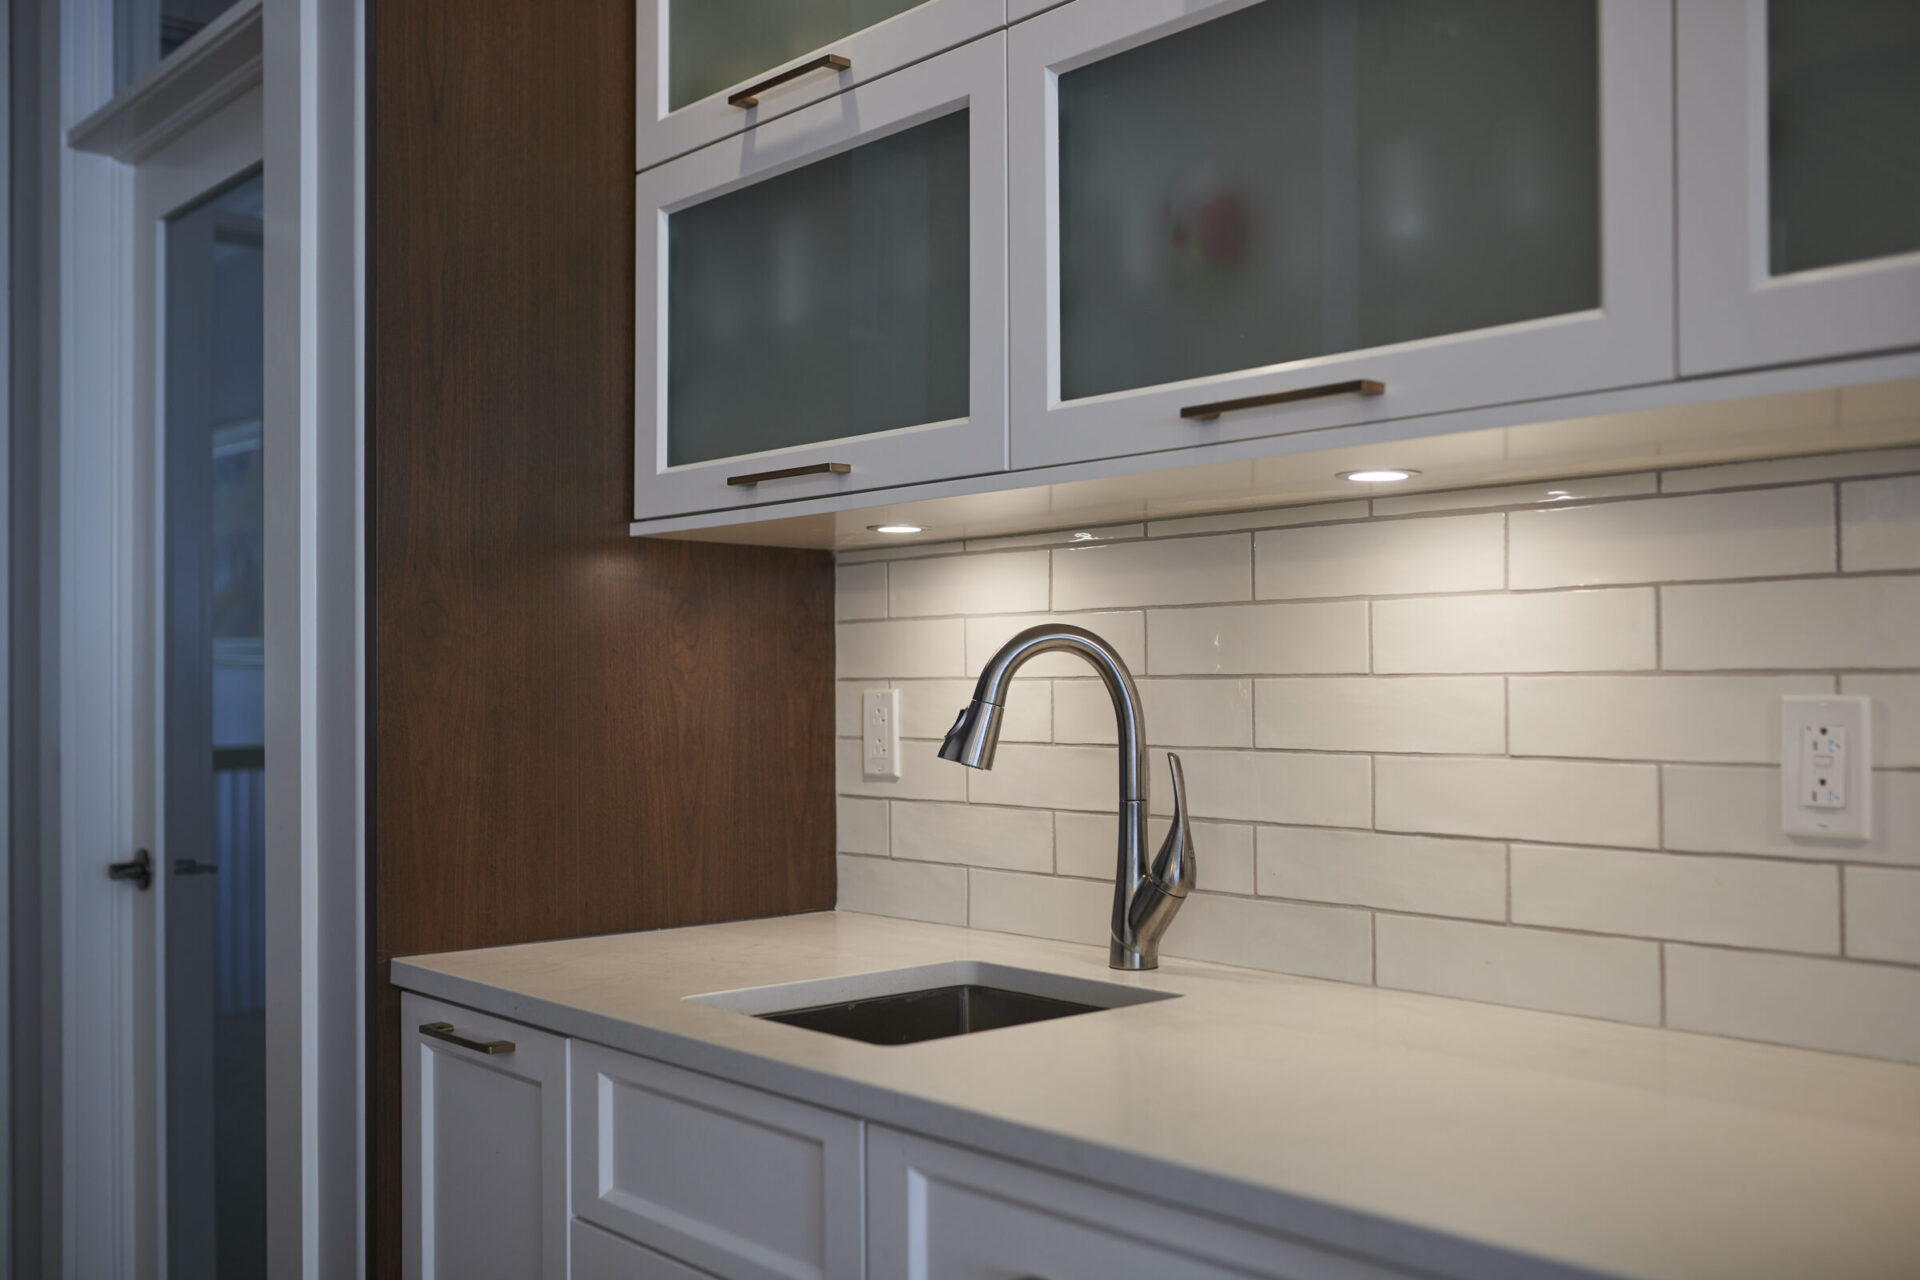 A modern kitchen with white subway tile backsplash, stainless steel faucet, and dark wood cabinets alongside white countertops and LED under-cabinet lighting.